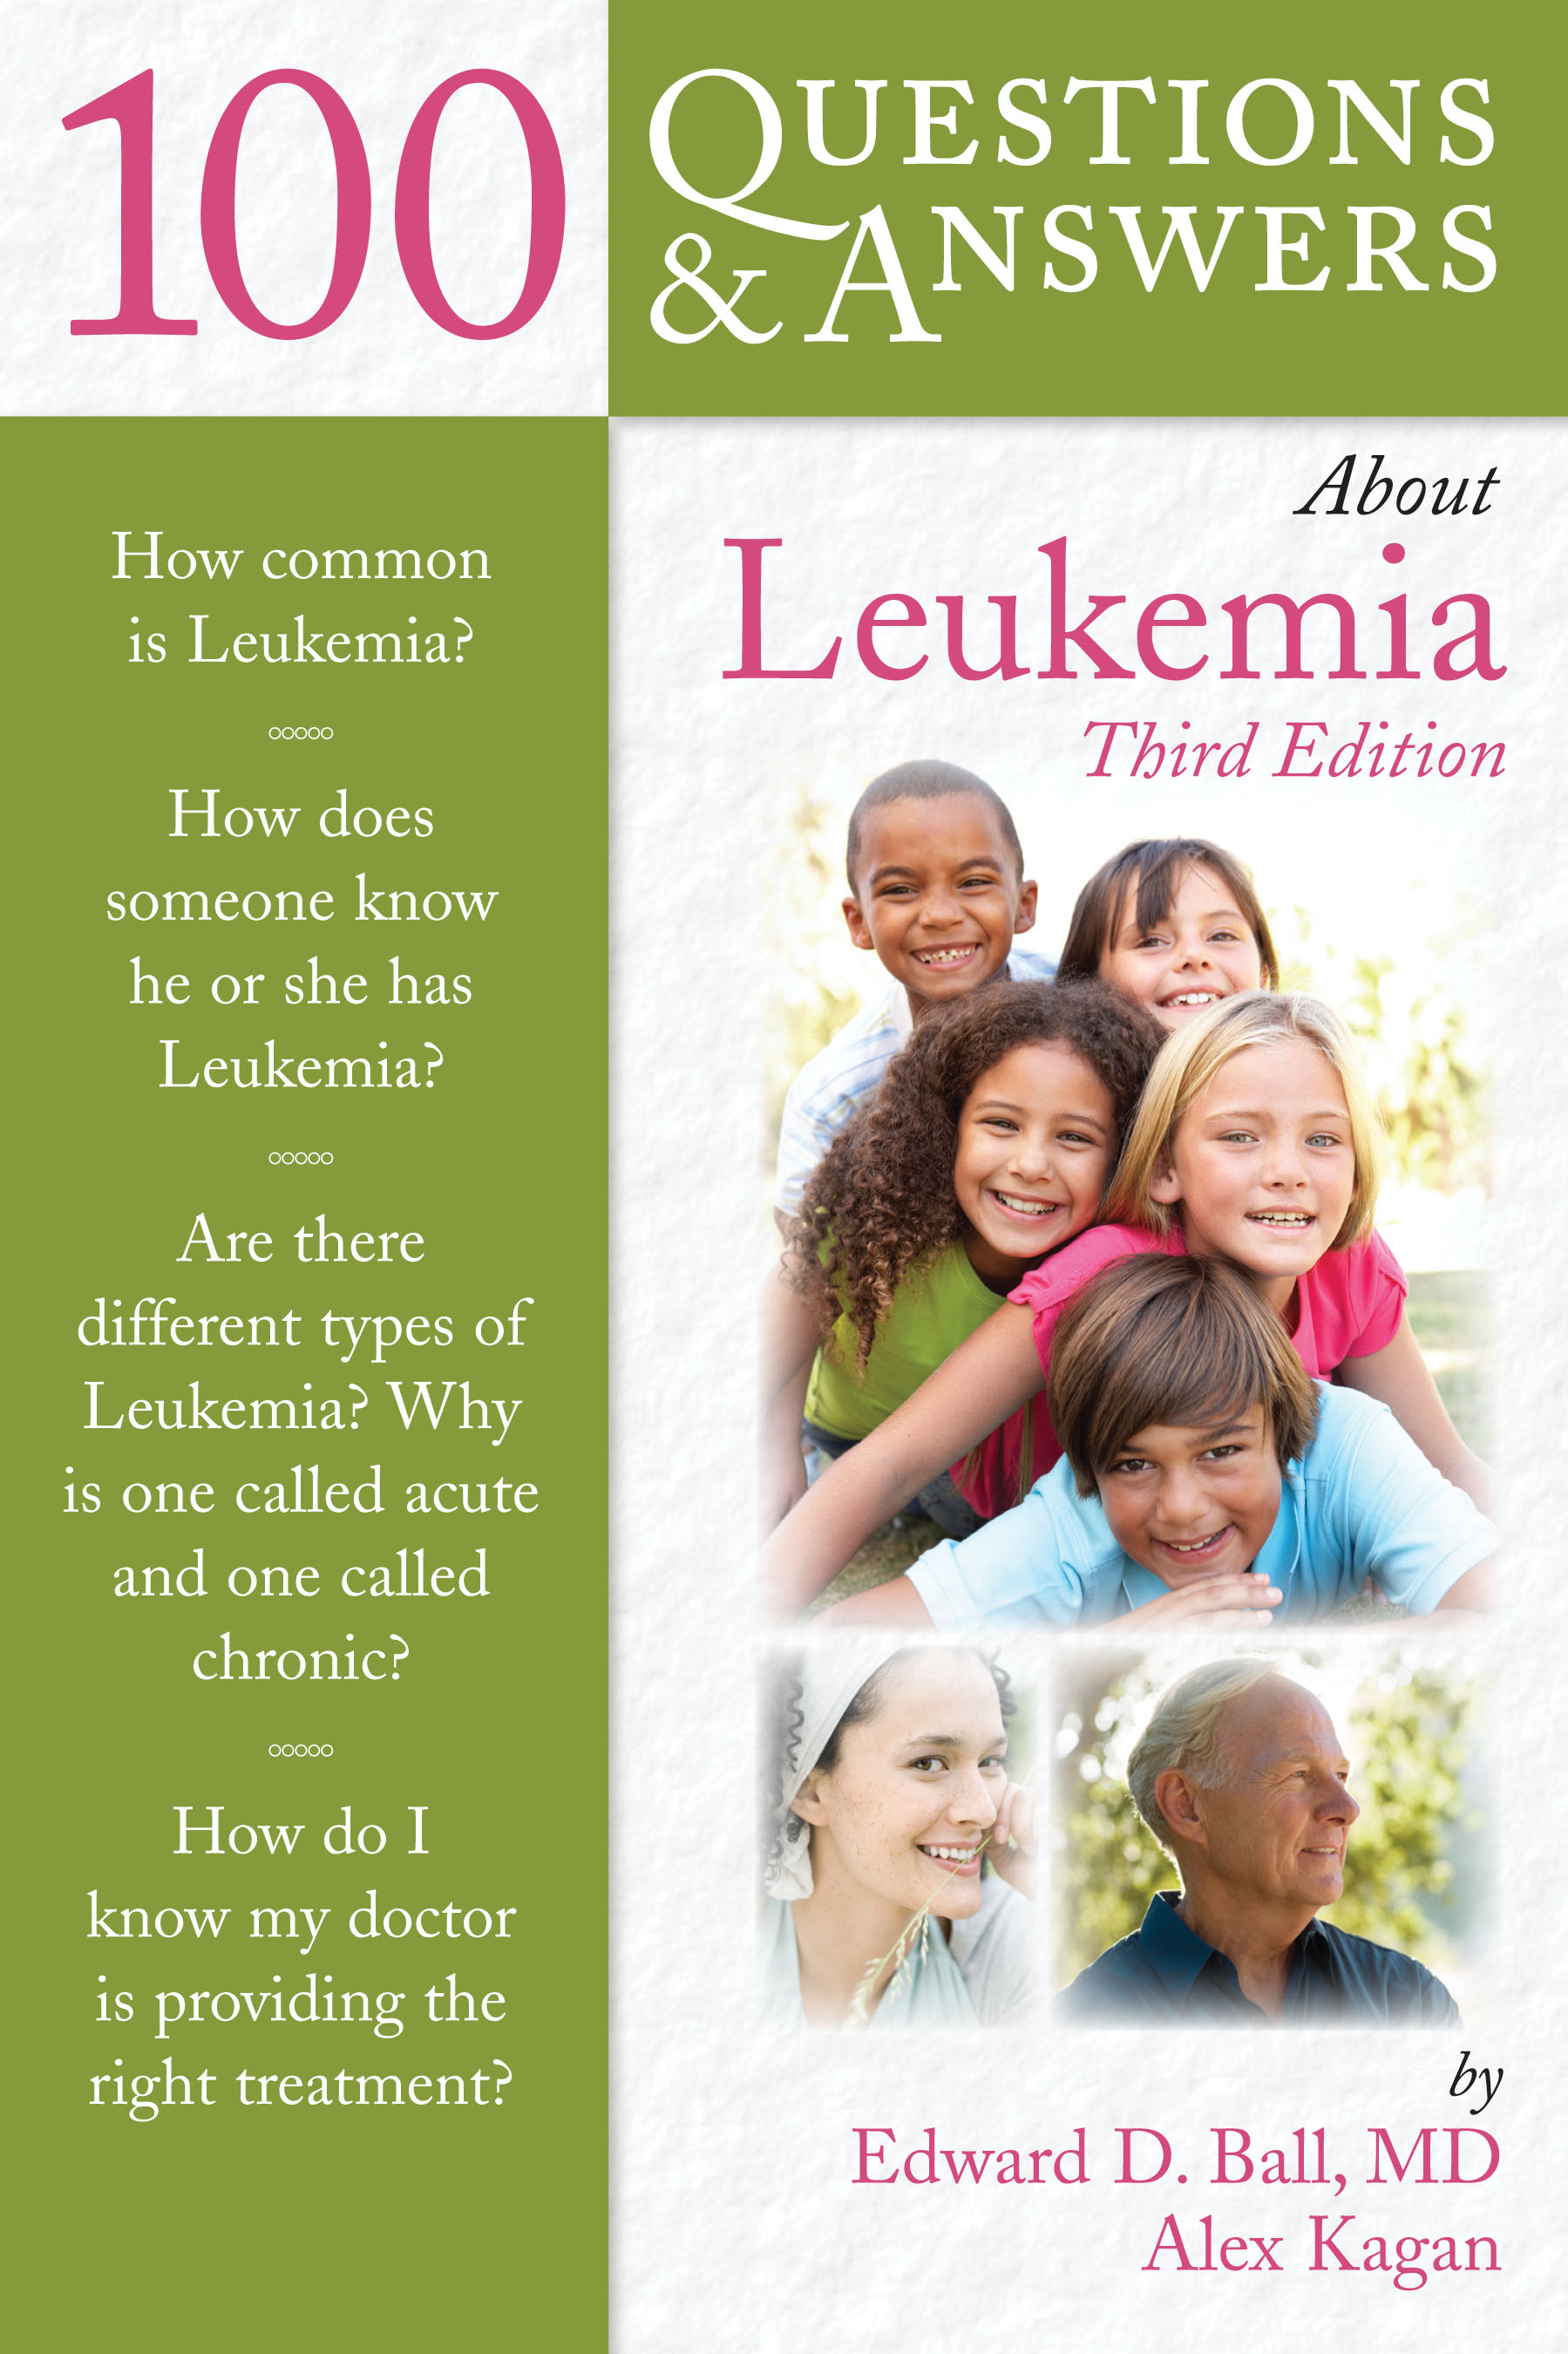 Image of the book cover for '100 Questions & Answers About Leukemia'